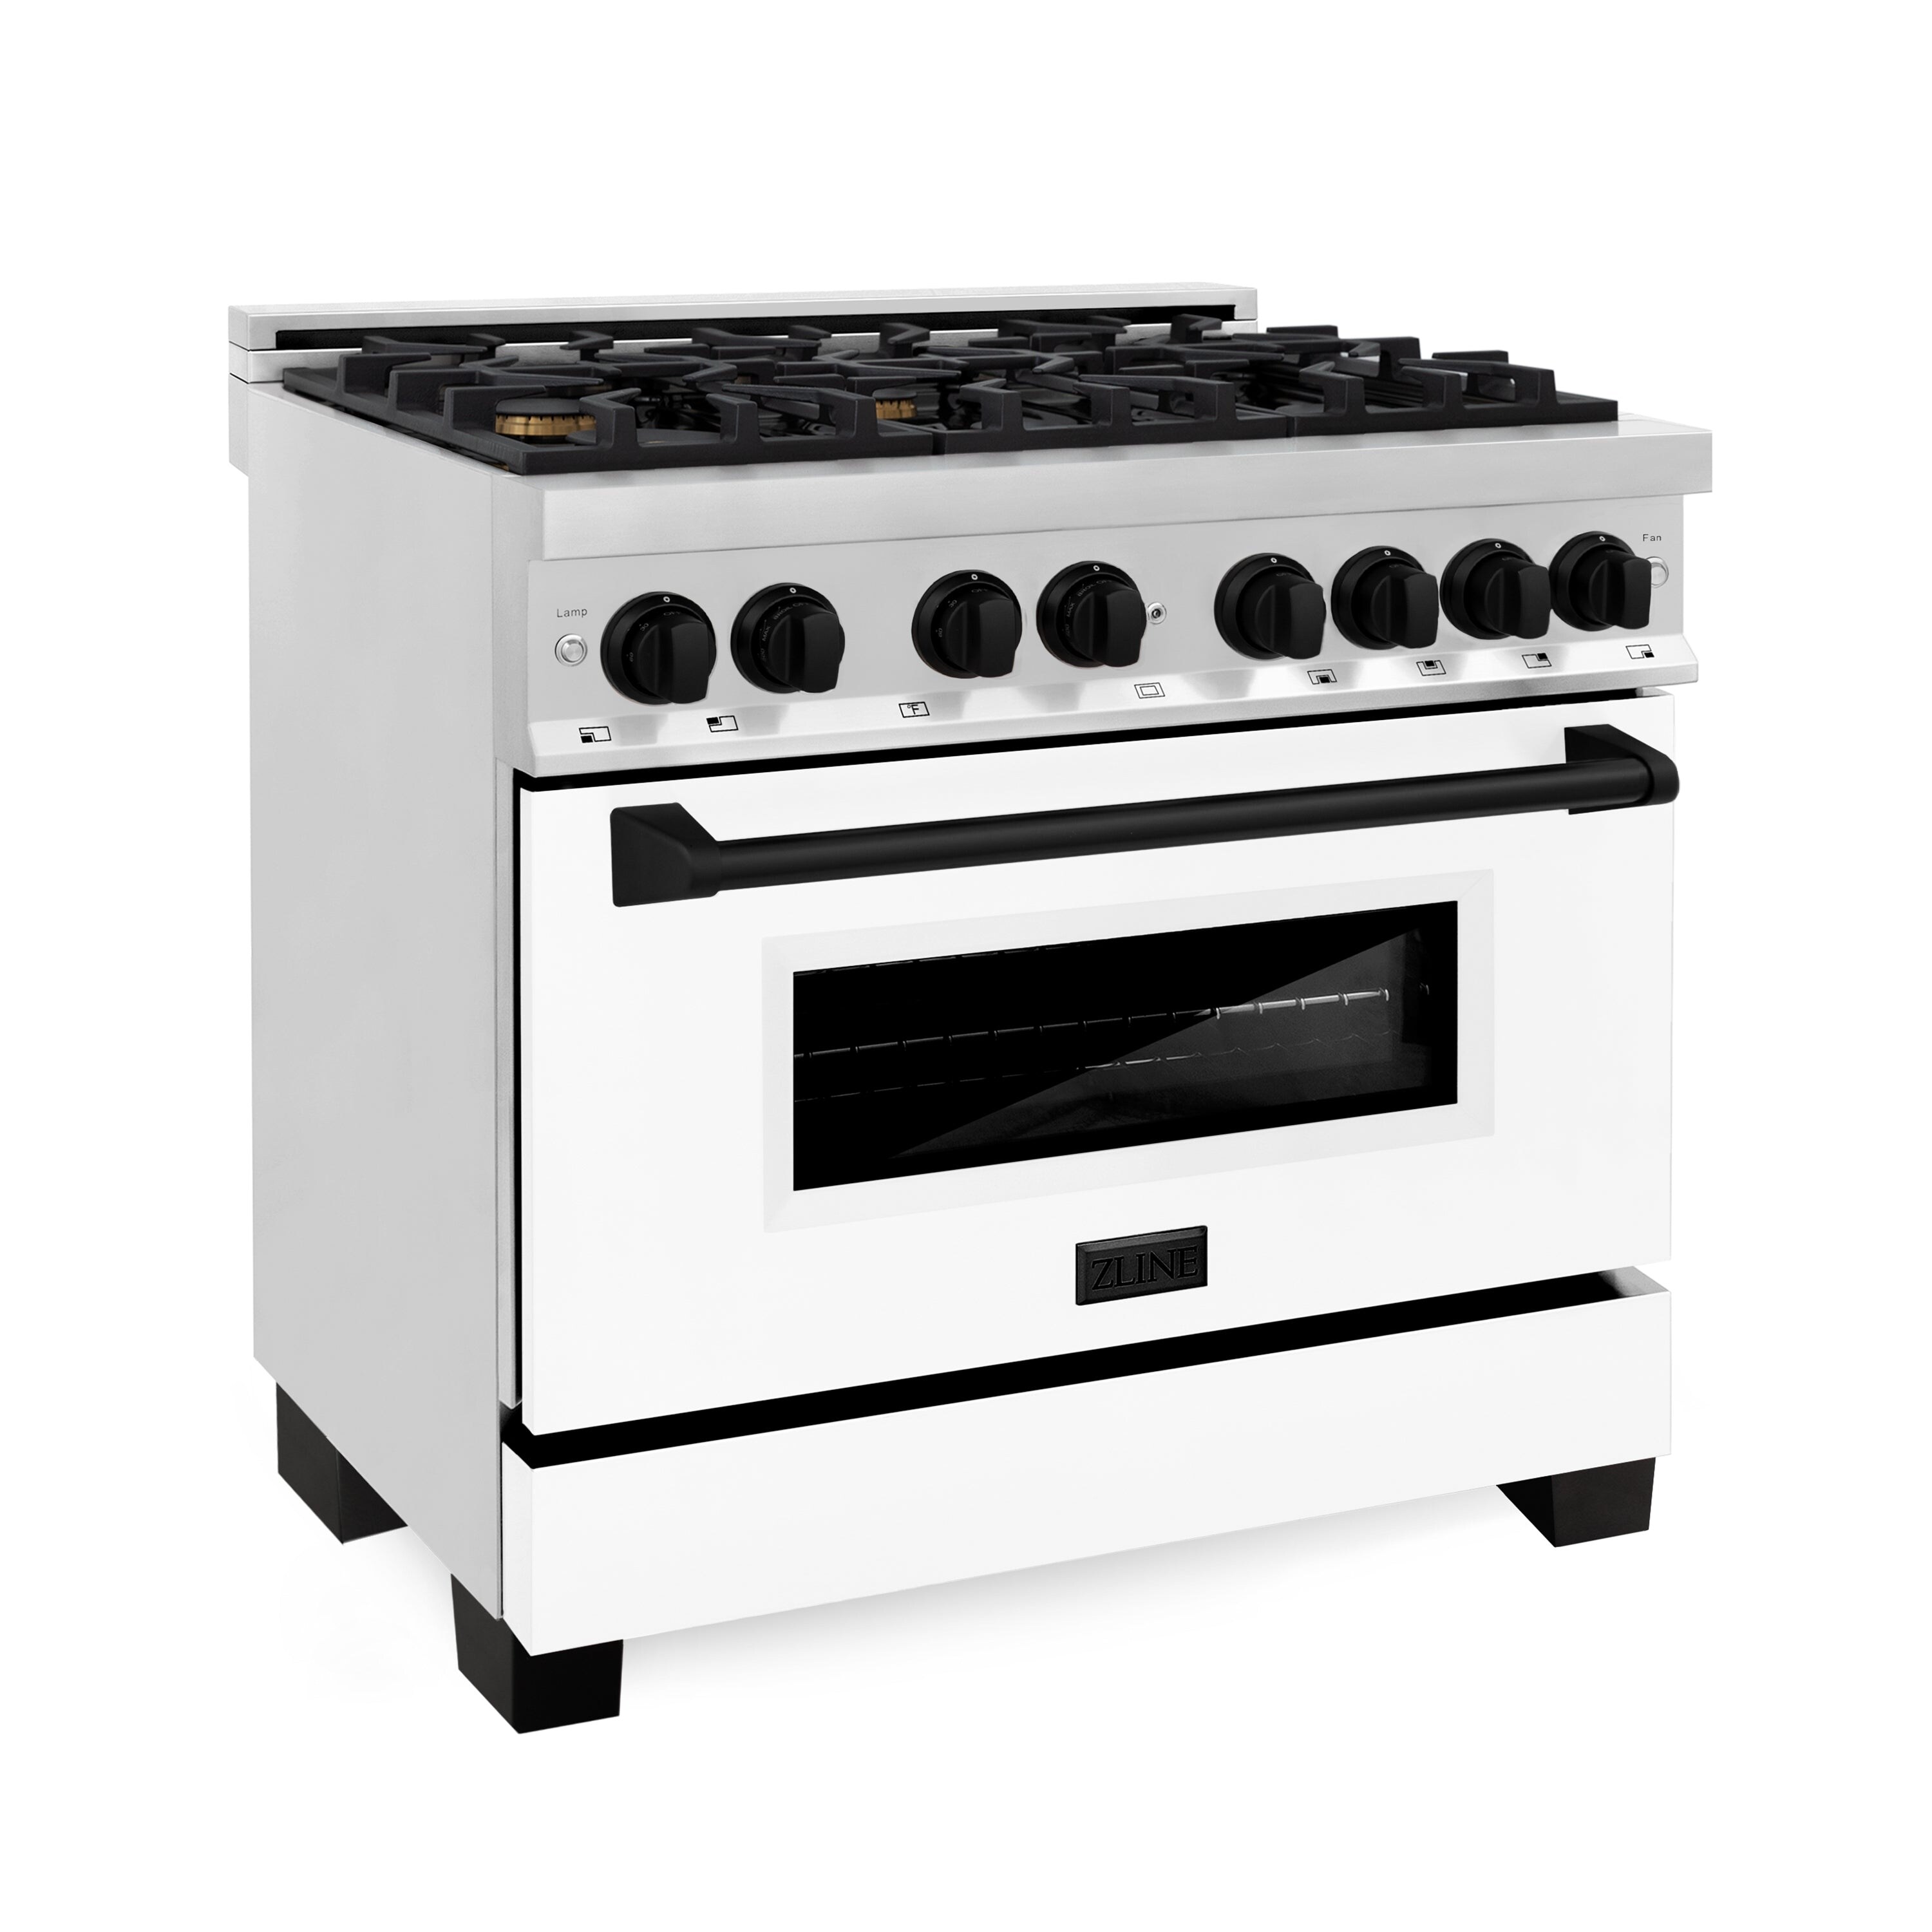 Zline Kitchen and Bath ZLINE Autograph Edition 36" Dual Fuel Range in Stainless Steel, White Matte with Accents